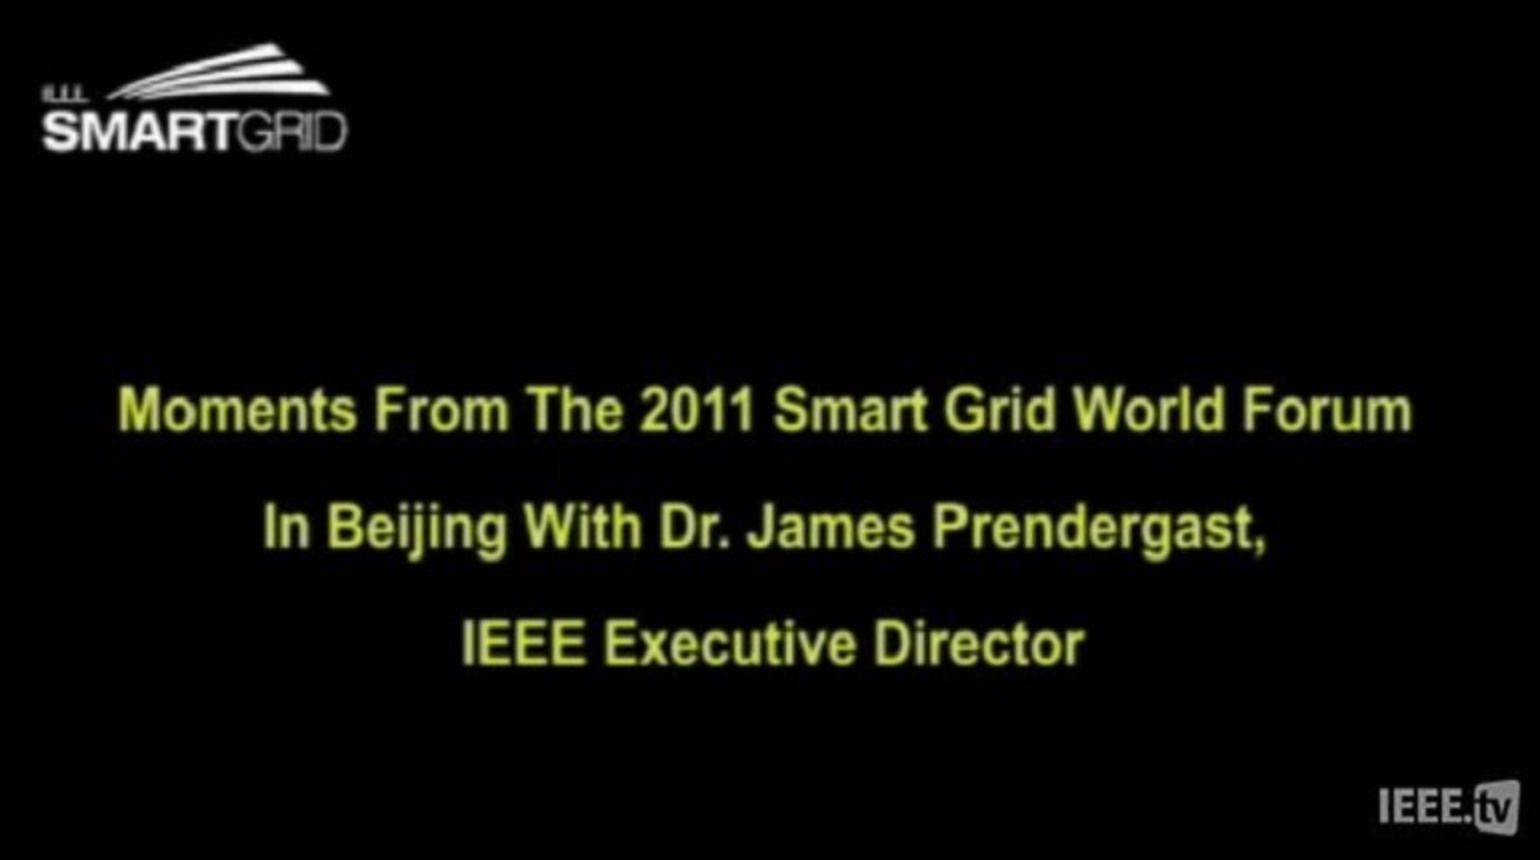 IEEE and the Developing Smart Grid